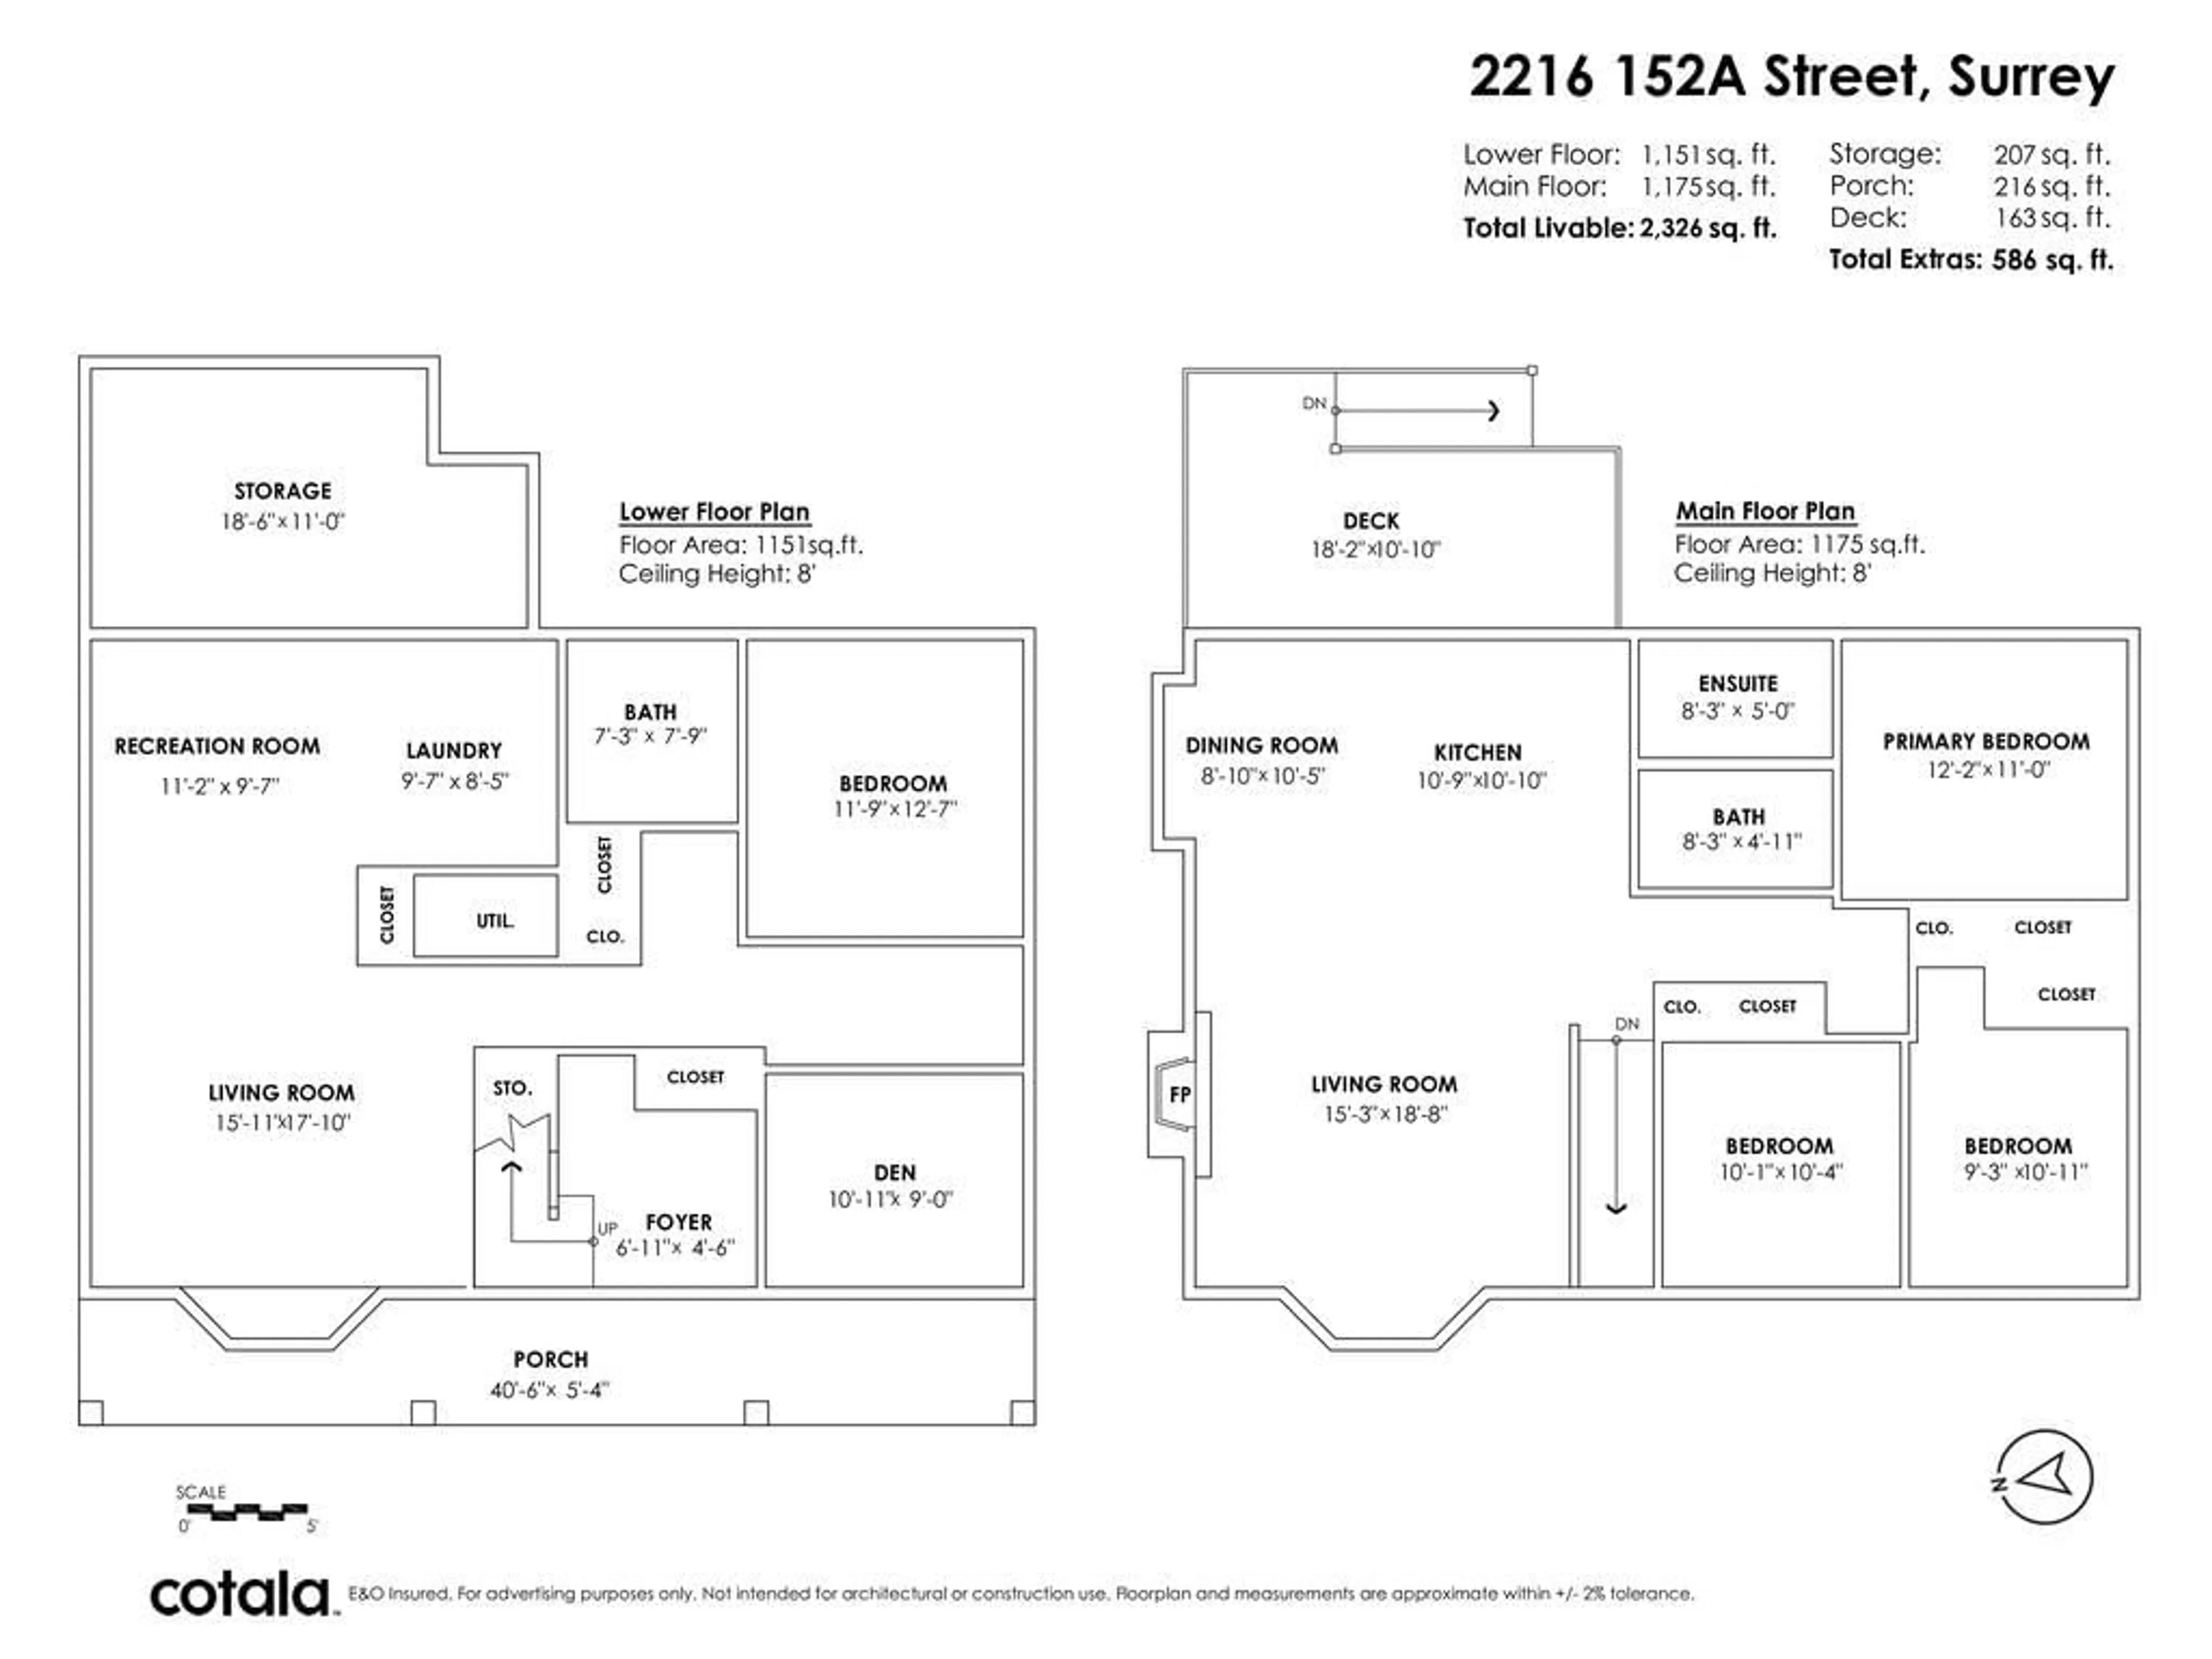 Floor plan for 2216 152A STREET, Surrey British Columbia V4A4R1